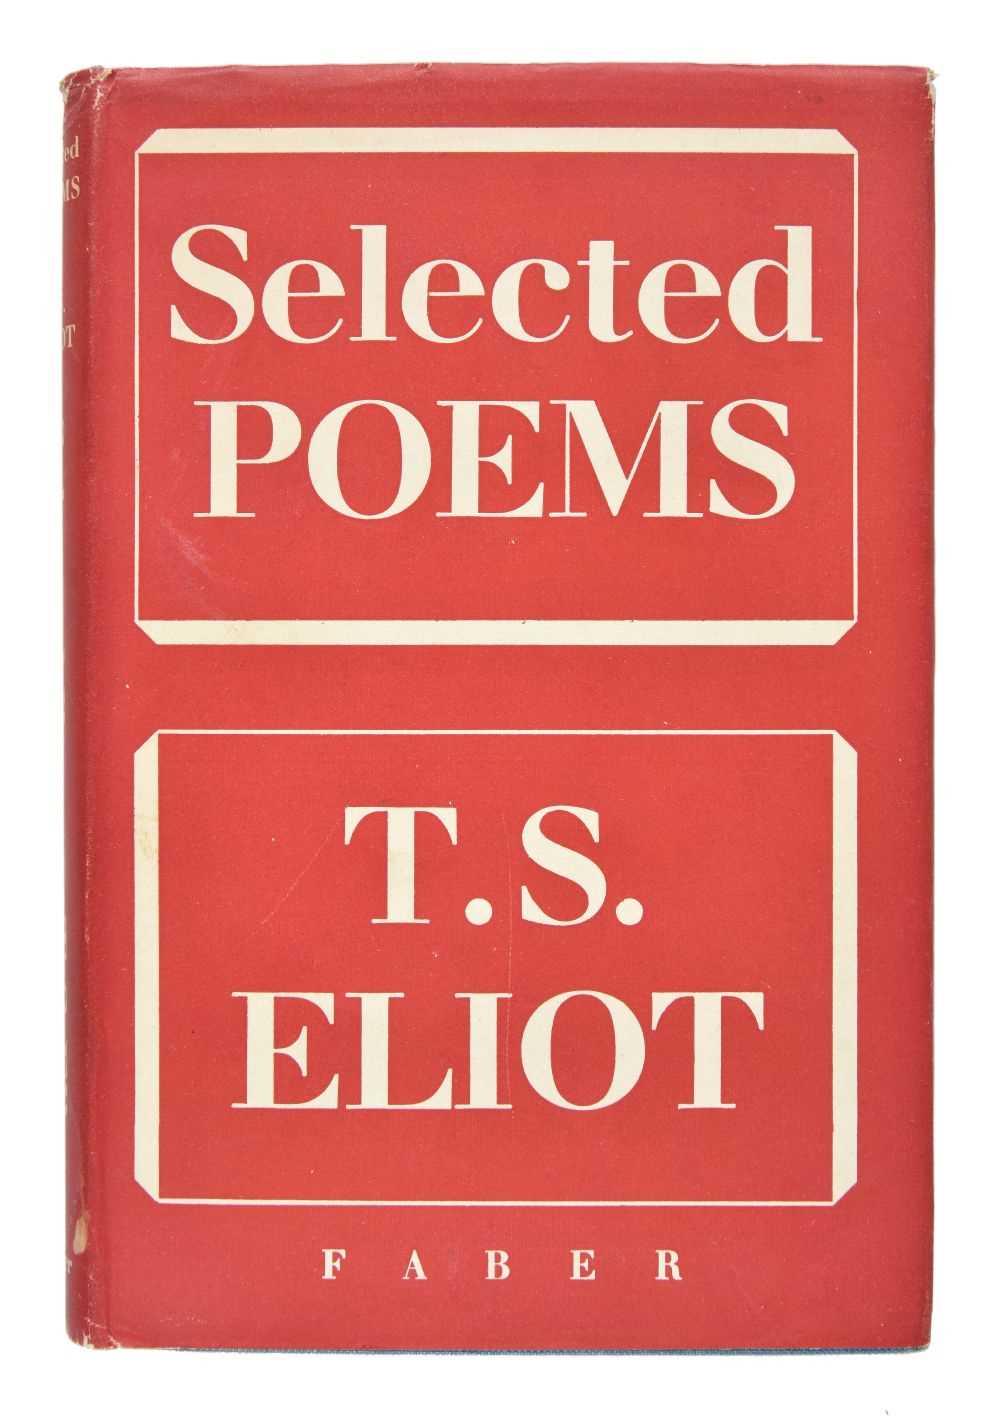 Lot 675 - Eliot (T.S.) Selected Poems, 1st Faber & Faber edition, 1954